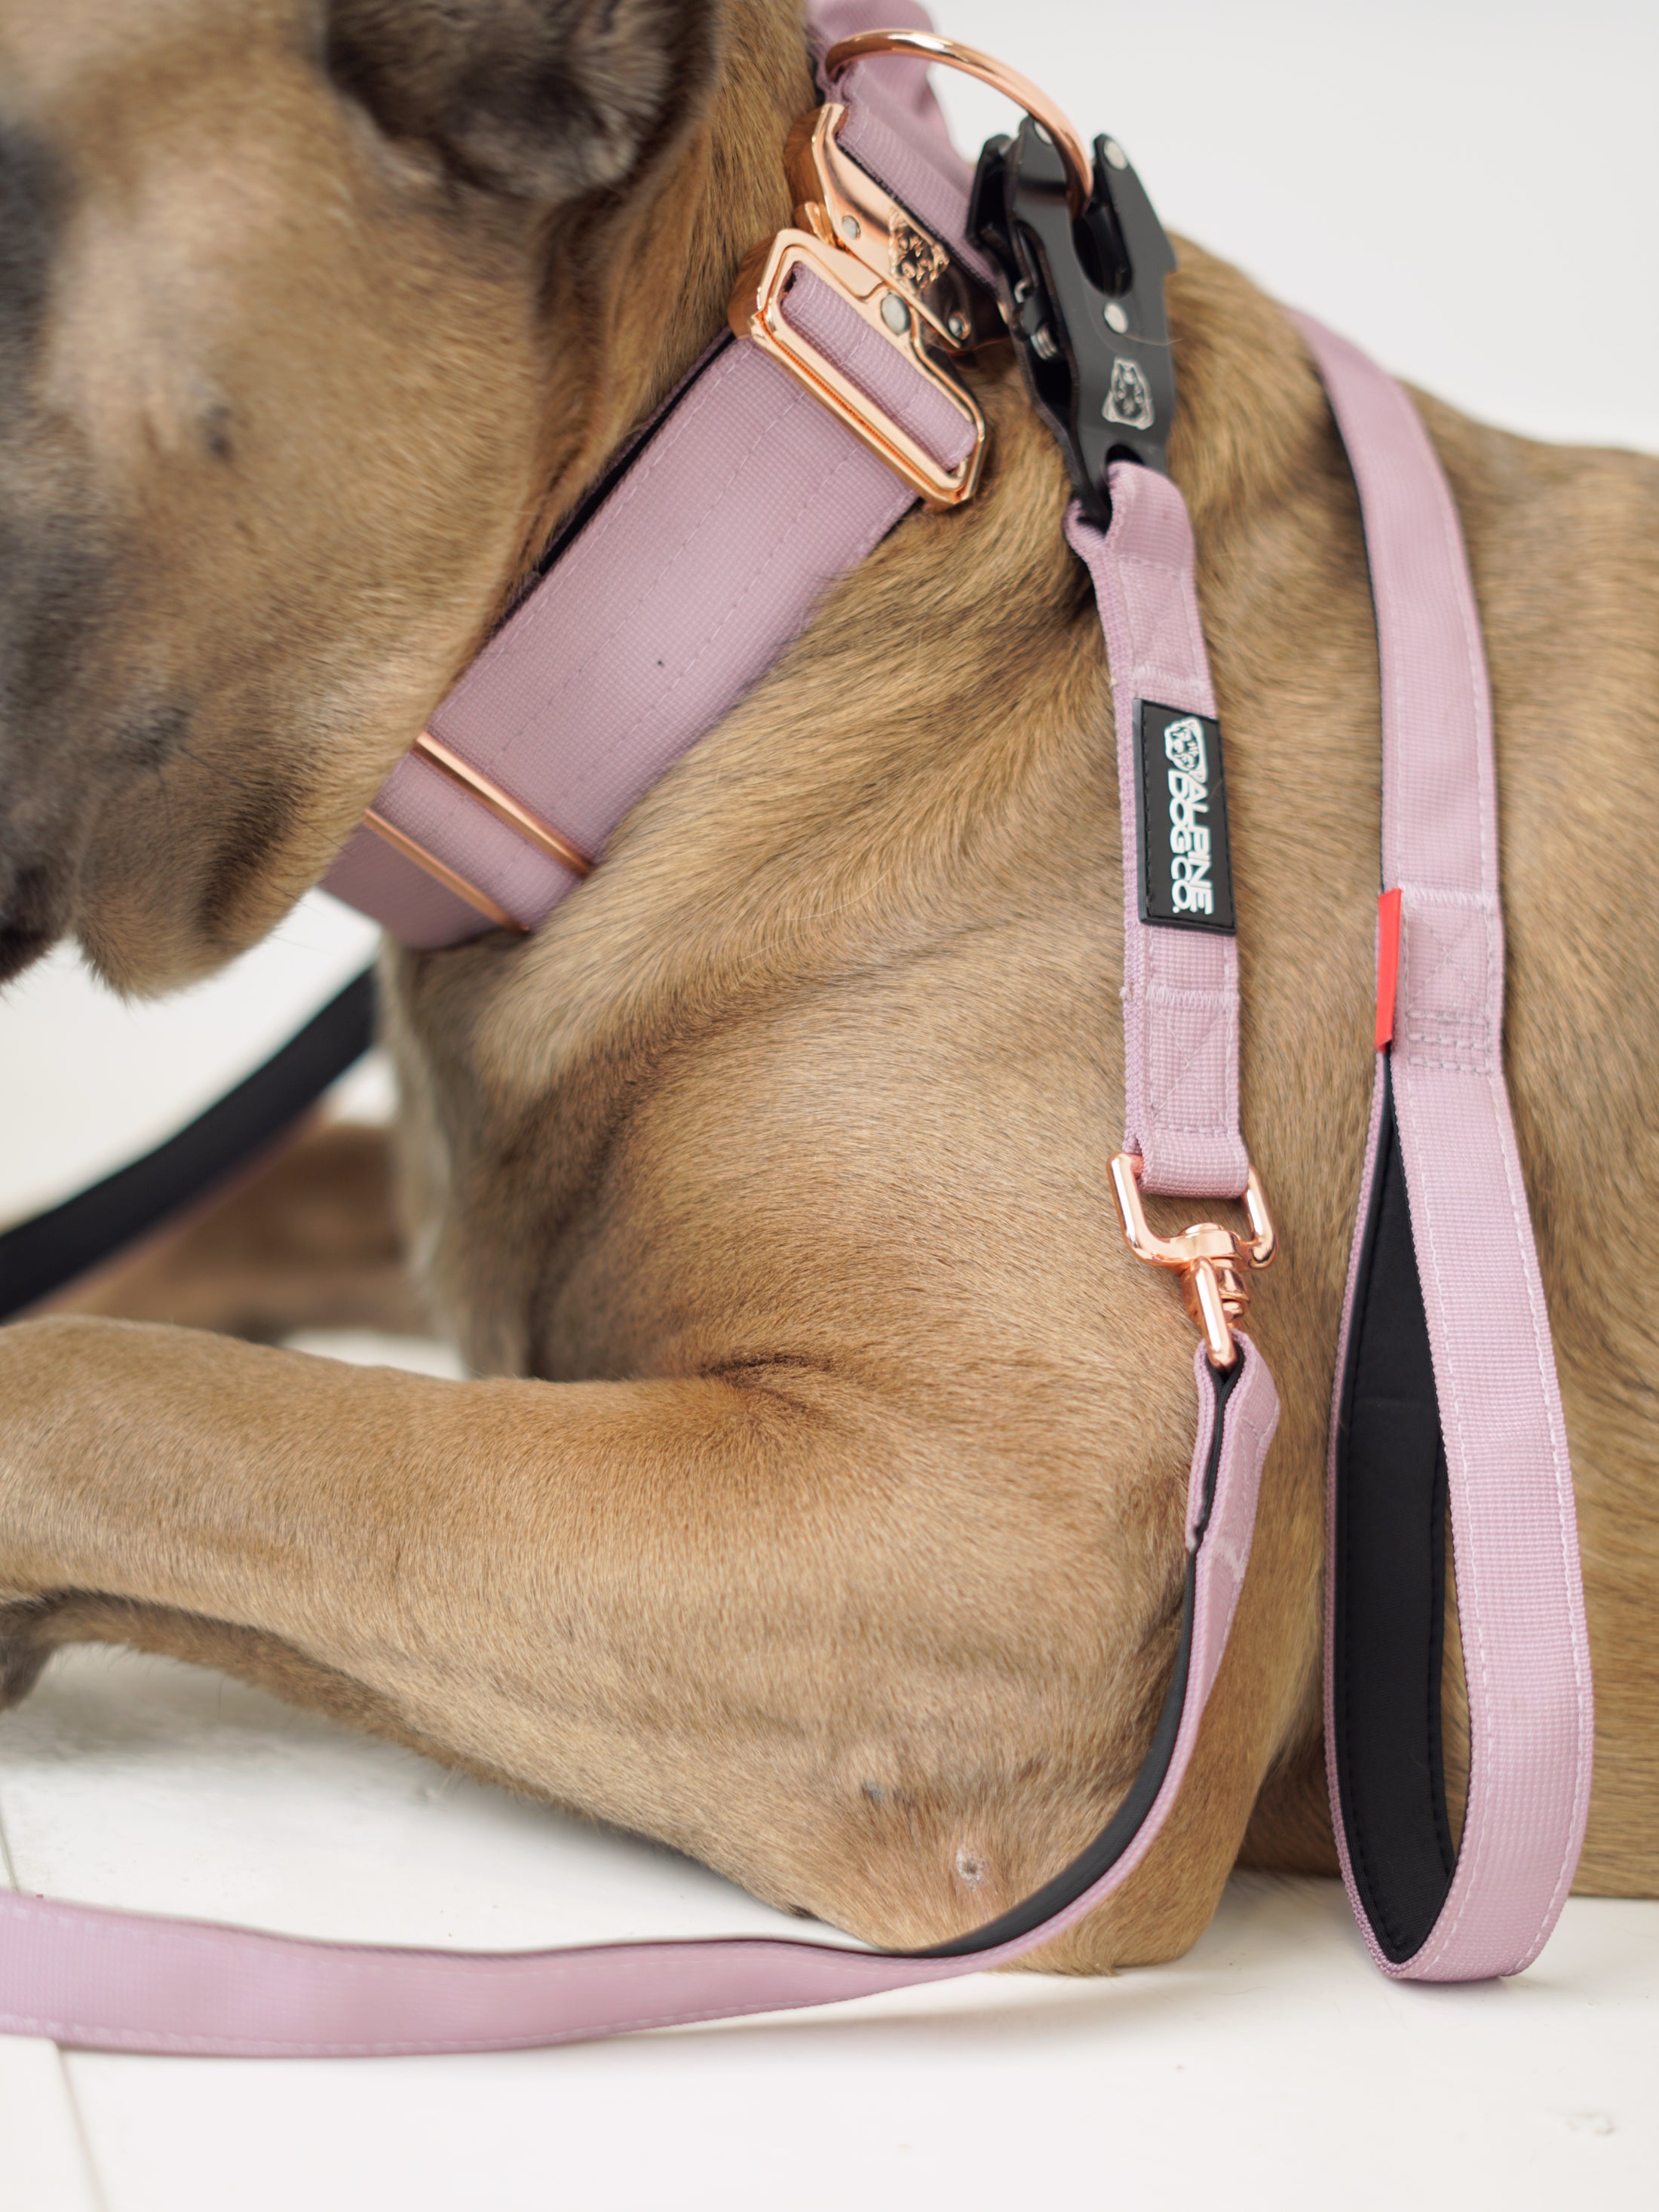 2" Tacti Luxe Dog Collar - Rose Gold - Sofia